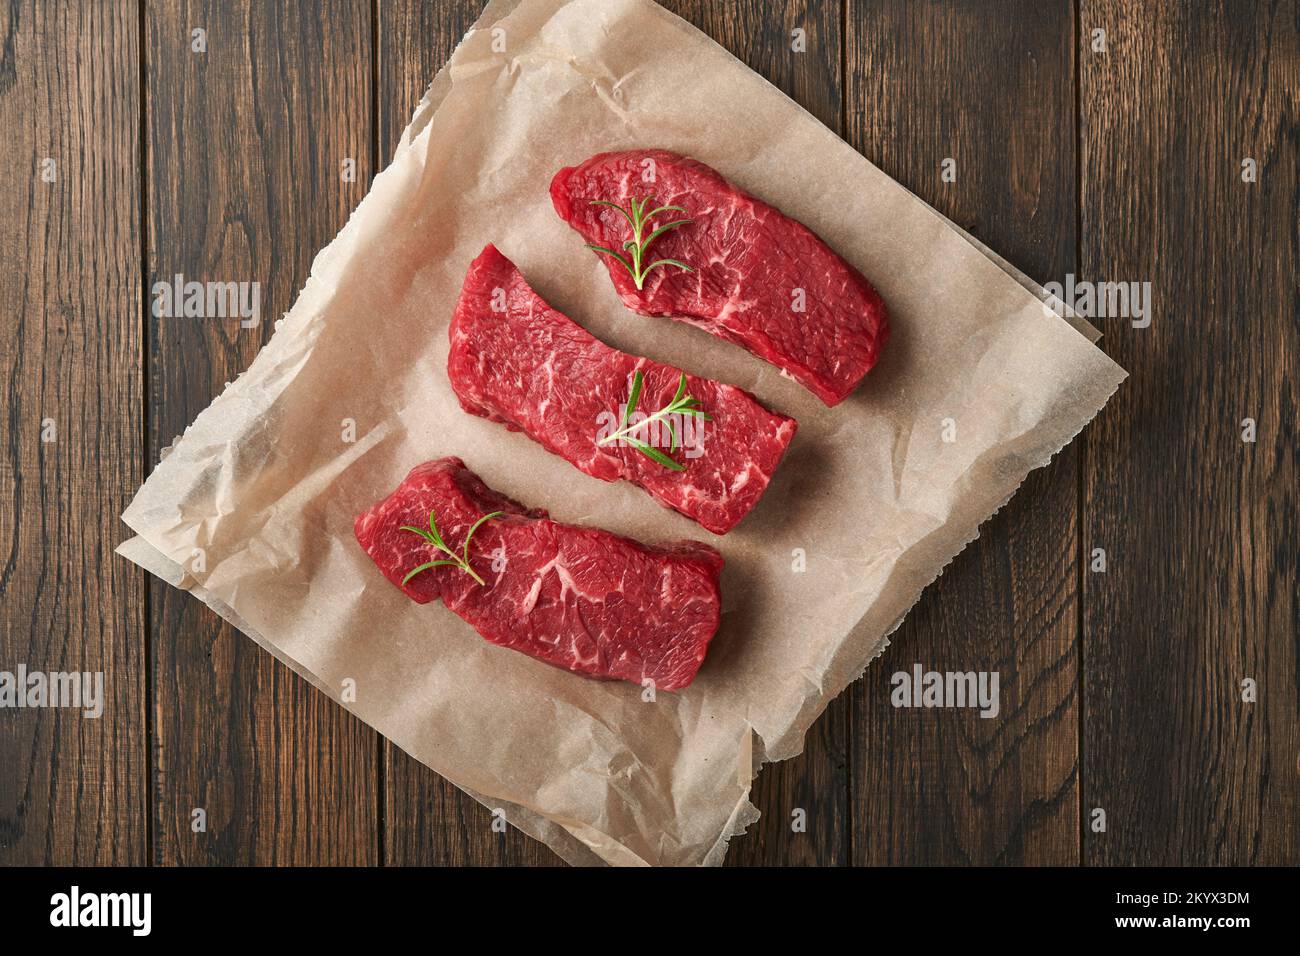 Raw steaks. Top blade steaks on wood burning board with spices, rosemary, vegetables and ingredients for cooking on old wooden background. Top view. Stock Photo